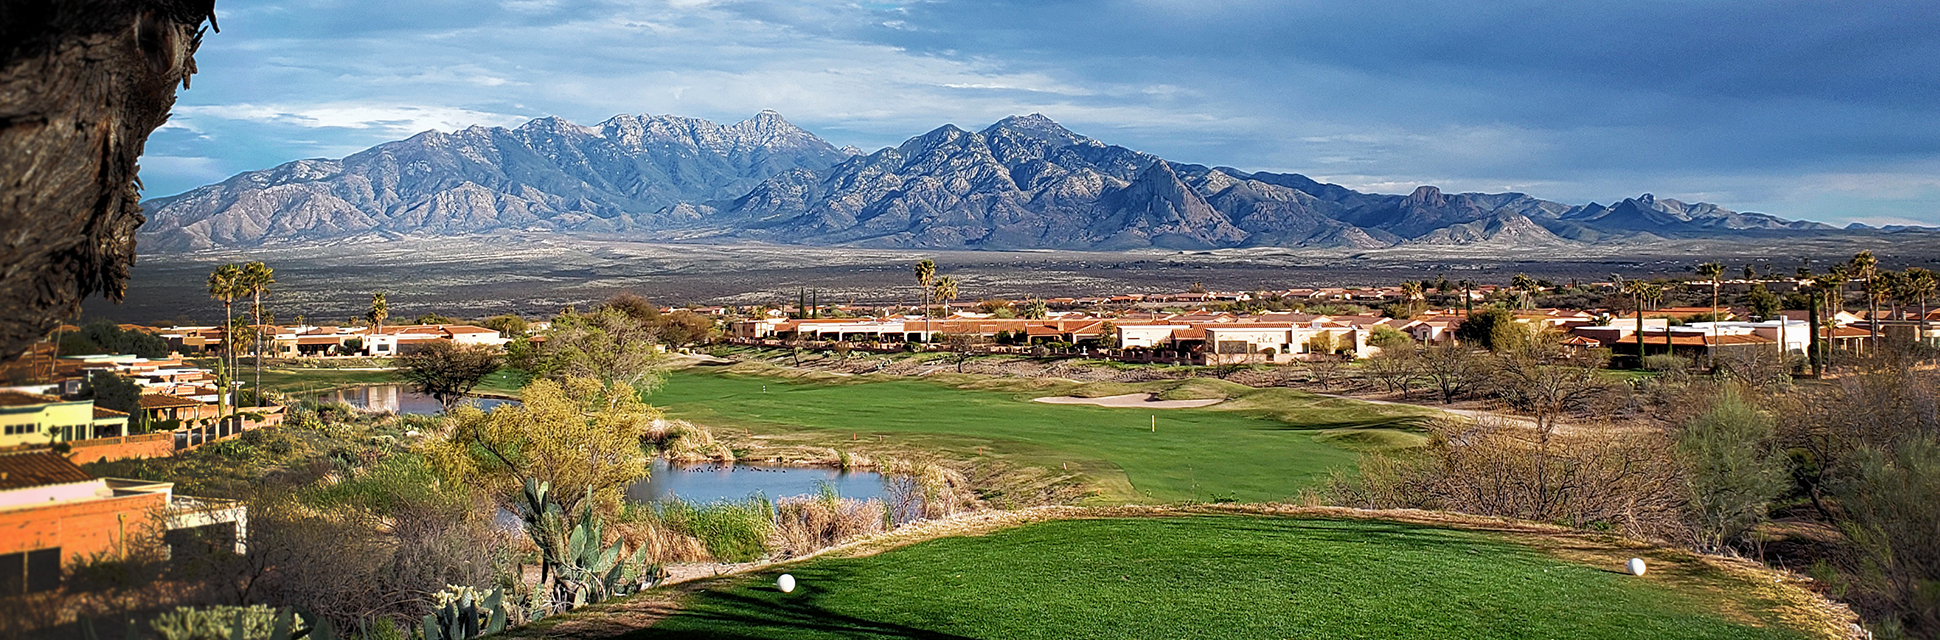 Aerial view of golf course with mountains in background